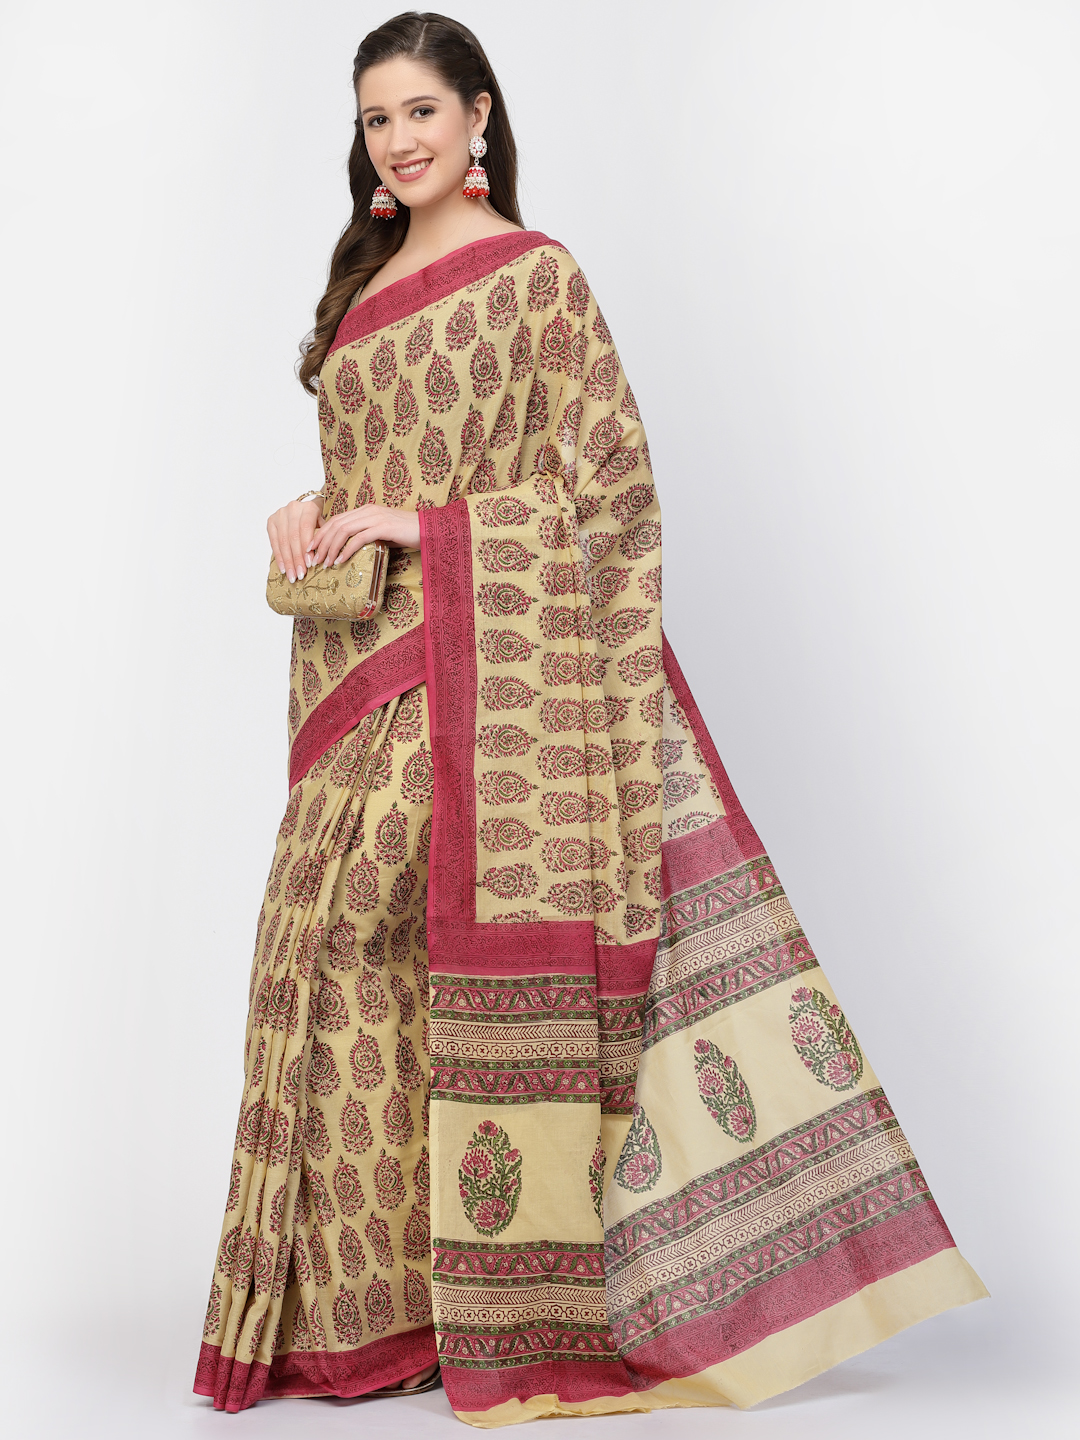 Women's Cotton Floral Printed Saree with Unstitched Blouse